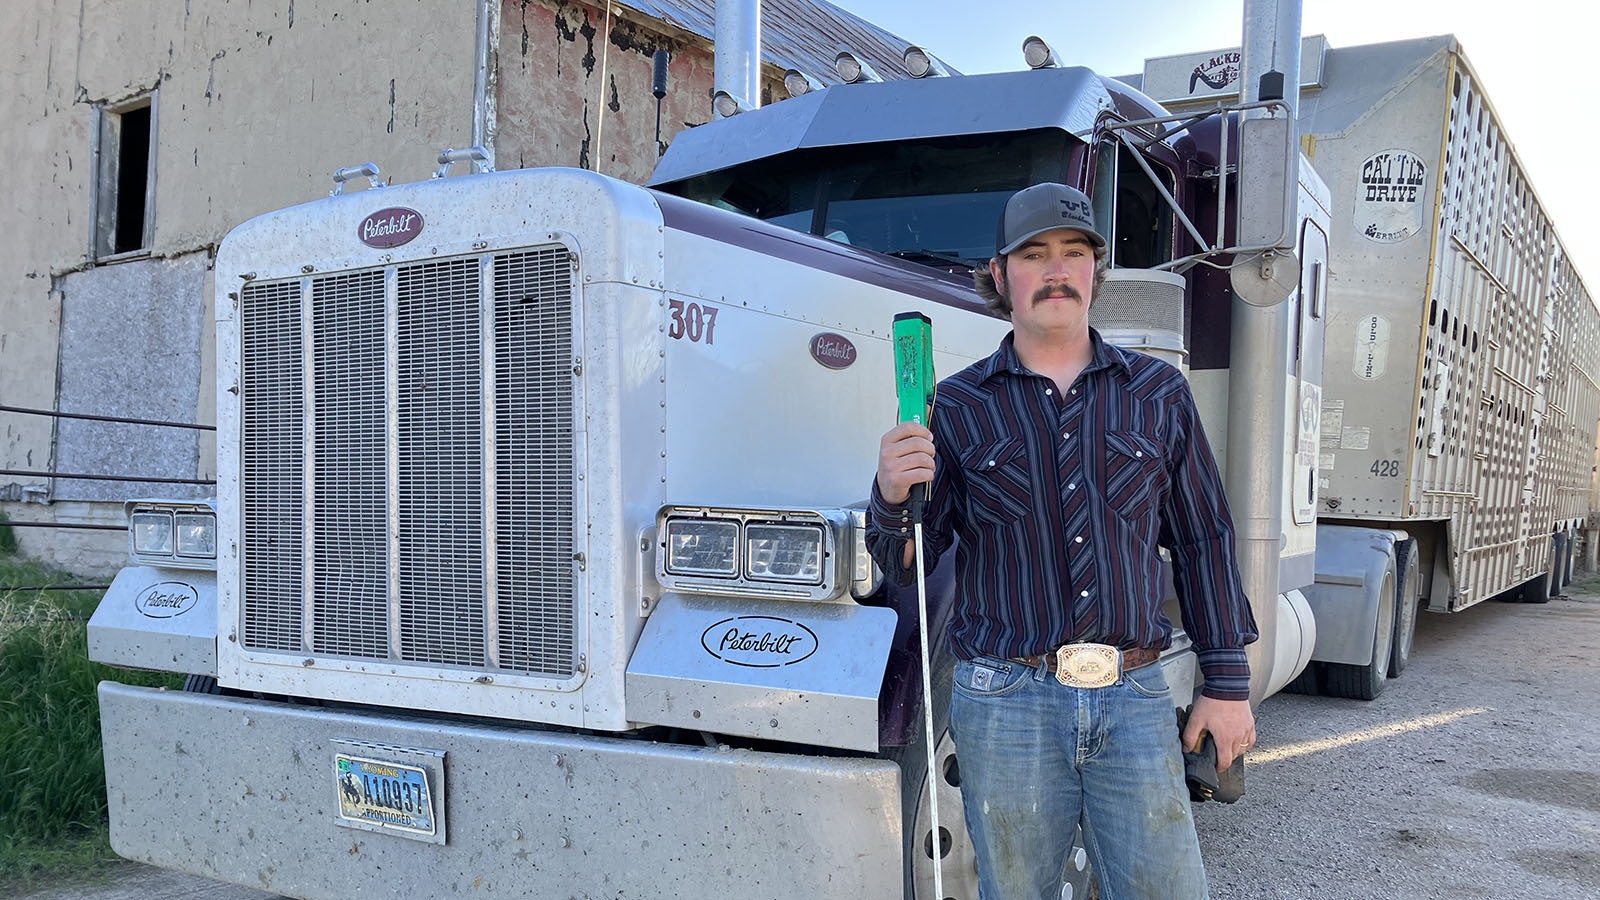 Brendan Blackburn of Blackburn Cattle Company said he enjoys hauling cattle and working with the people on the Wyoming ranches he meets as part of his job.